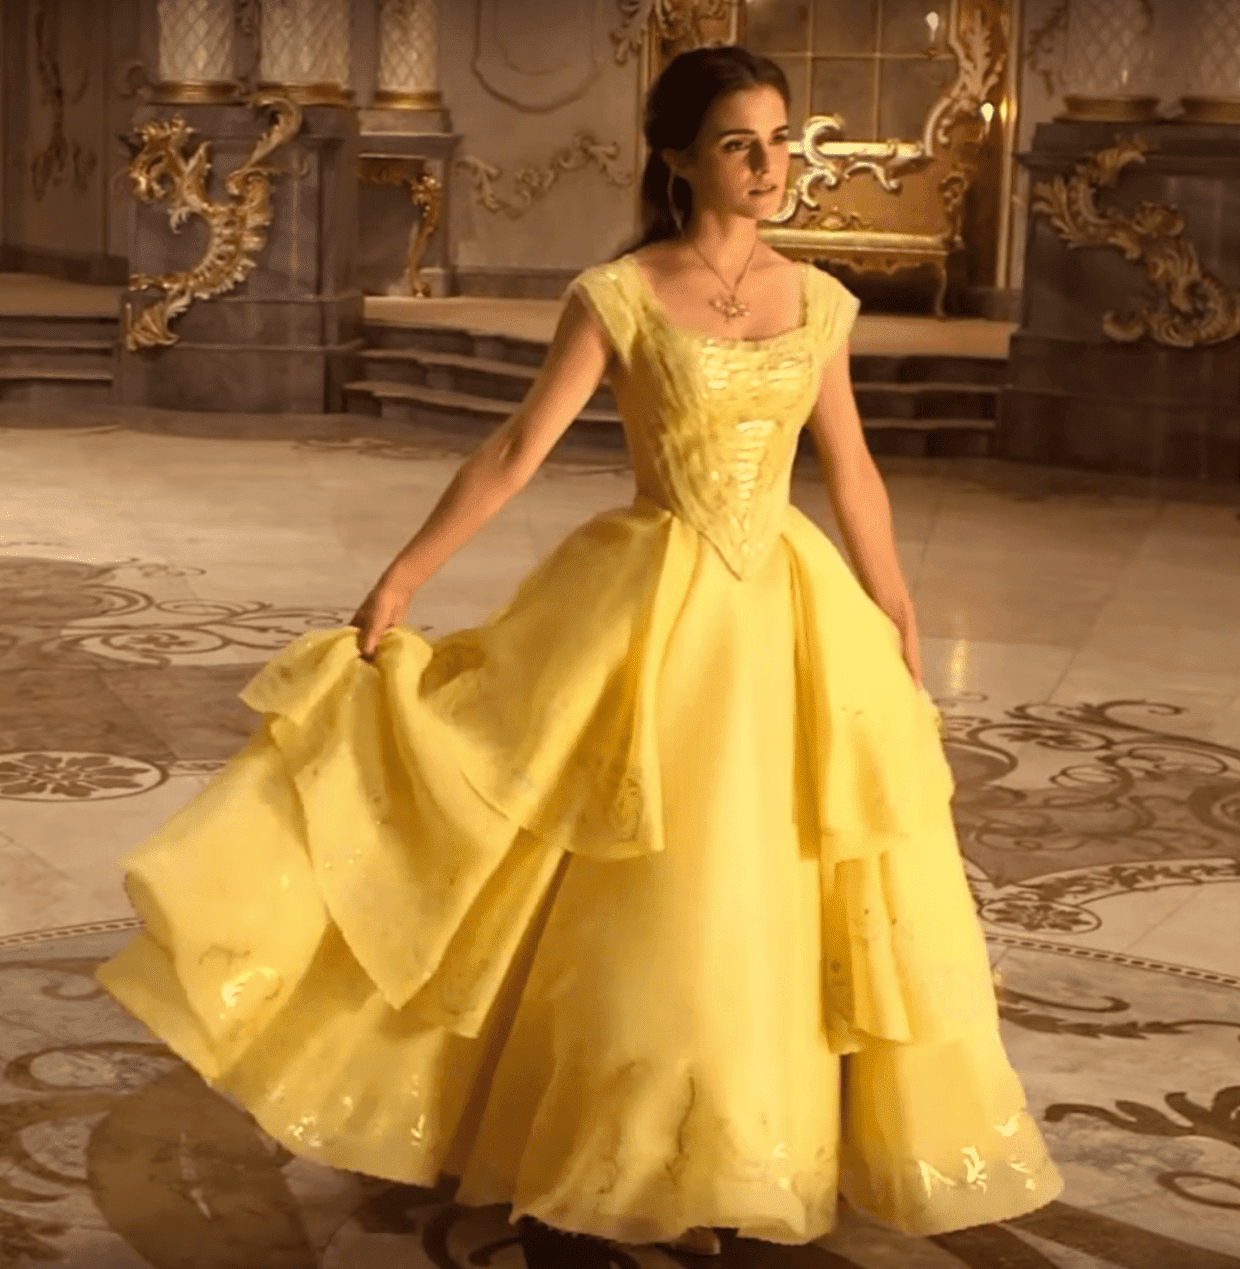 Emma’s (“Belle’s) yellow gown from Beauty and the Beast A Costume